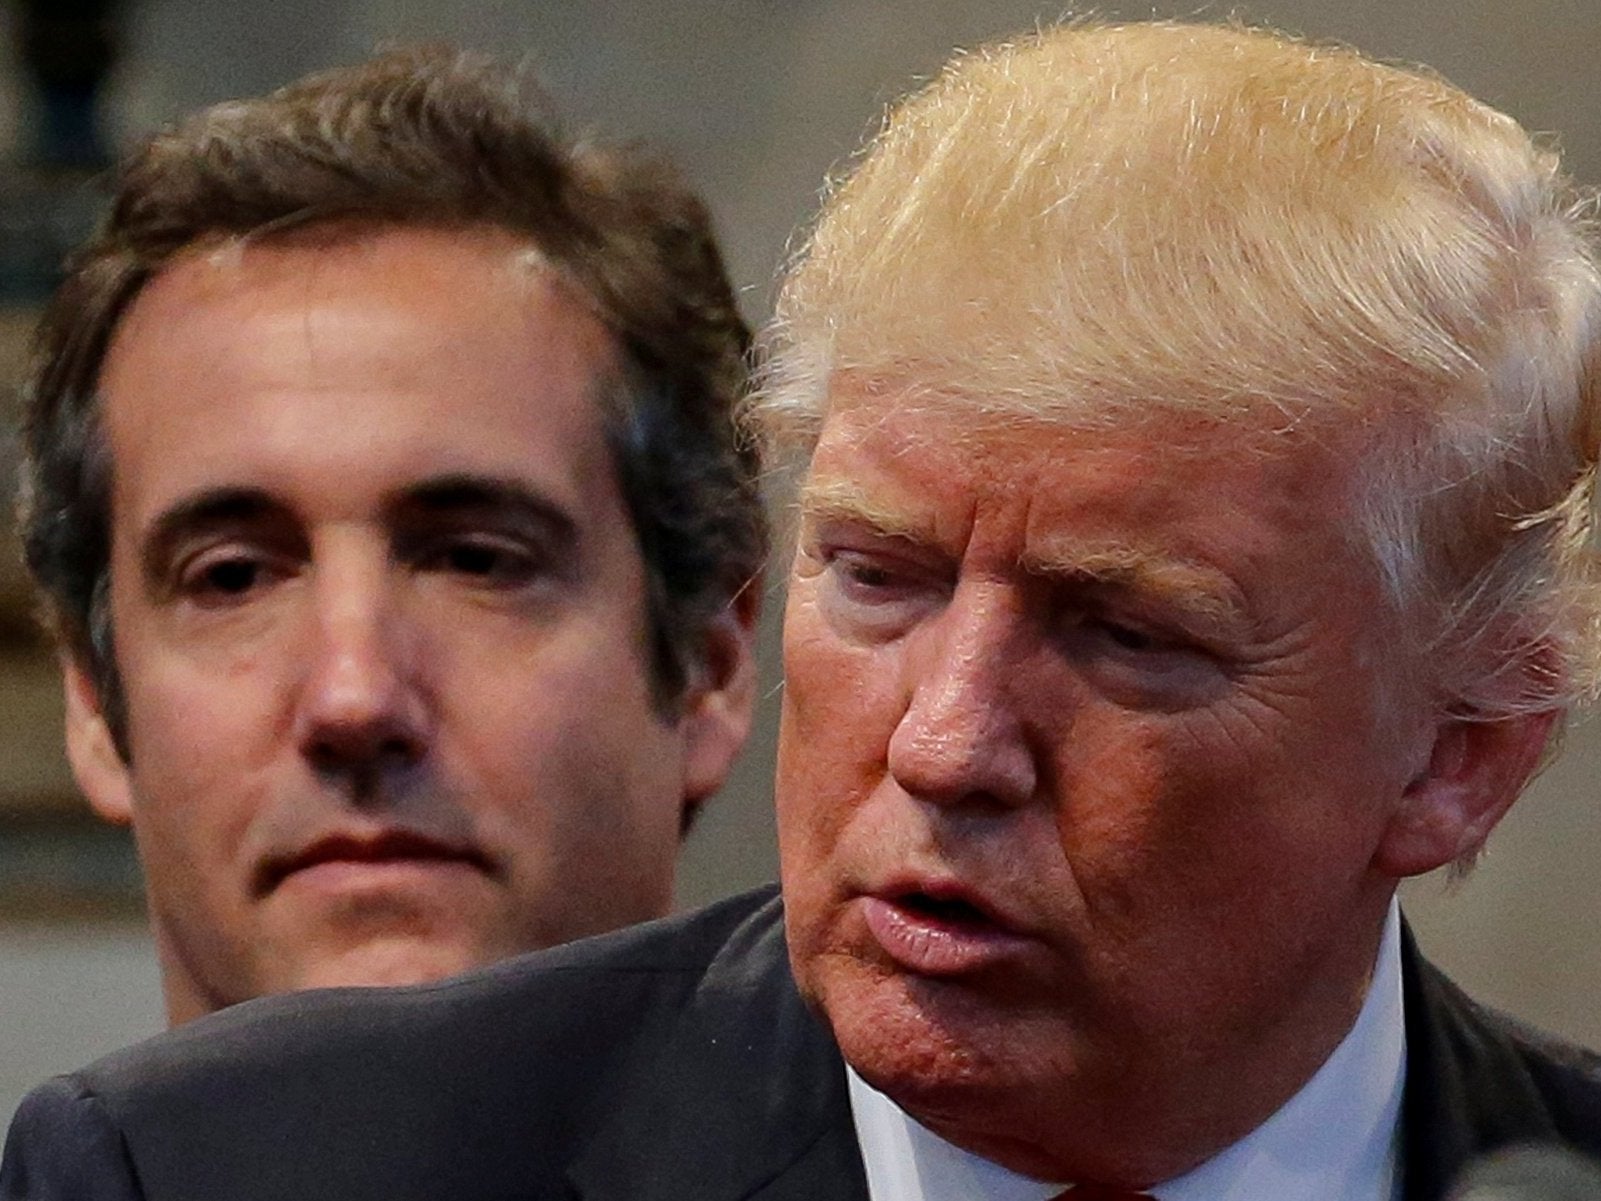 Donald Trump with his then personal lawyer Michael Cohen in September 2016. Prosecutors believe Cohen know where skeletons are rattling away about the president, his family and close associates